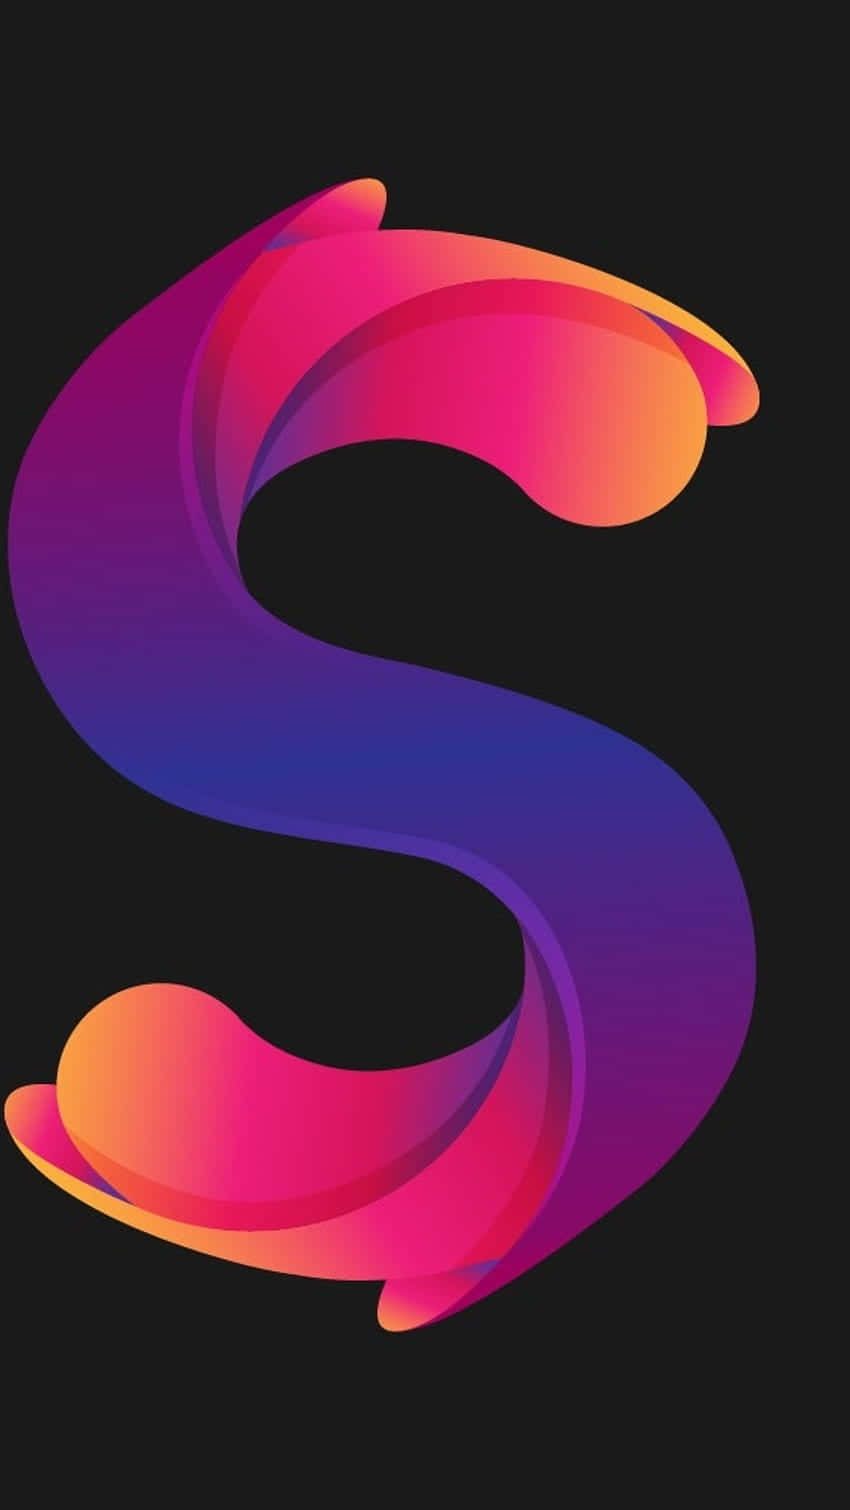 Download A Colorful Logo With The Letter S | Wallpapers.com